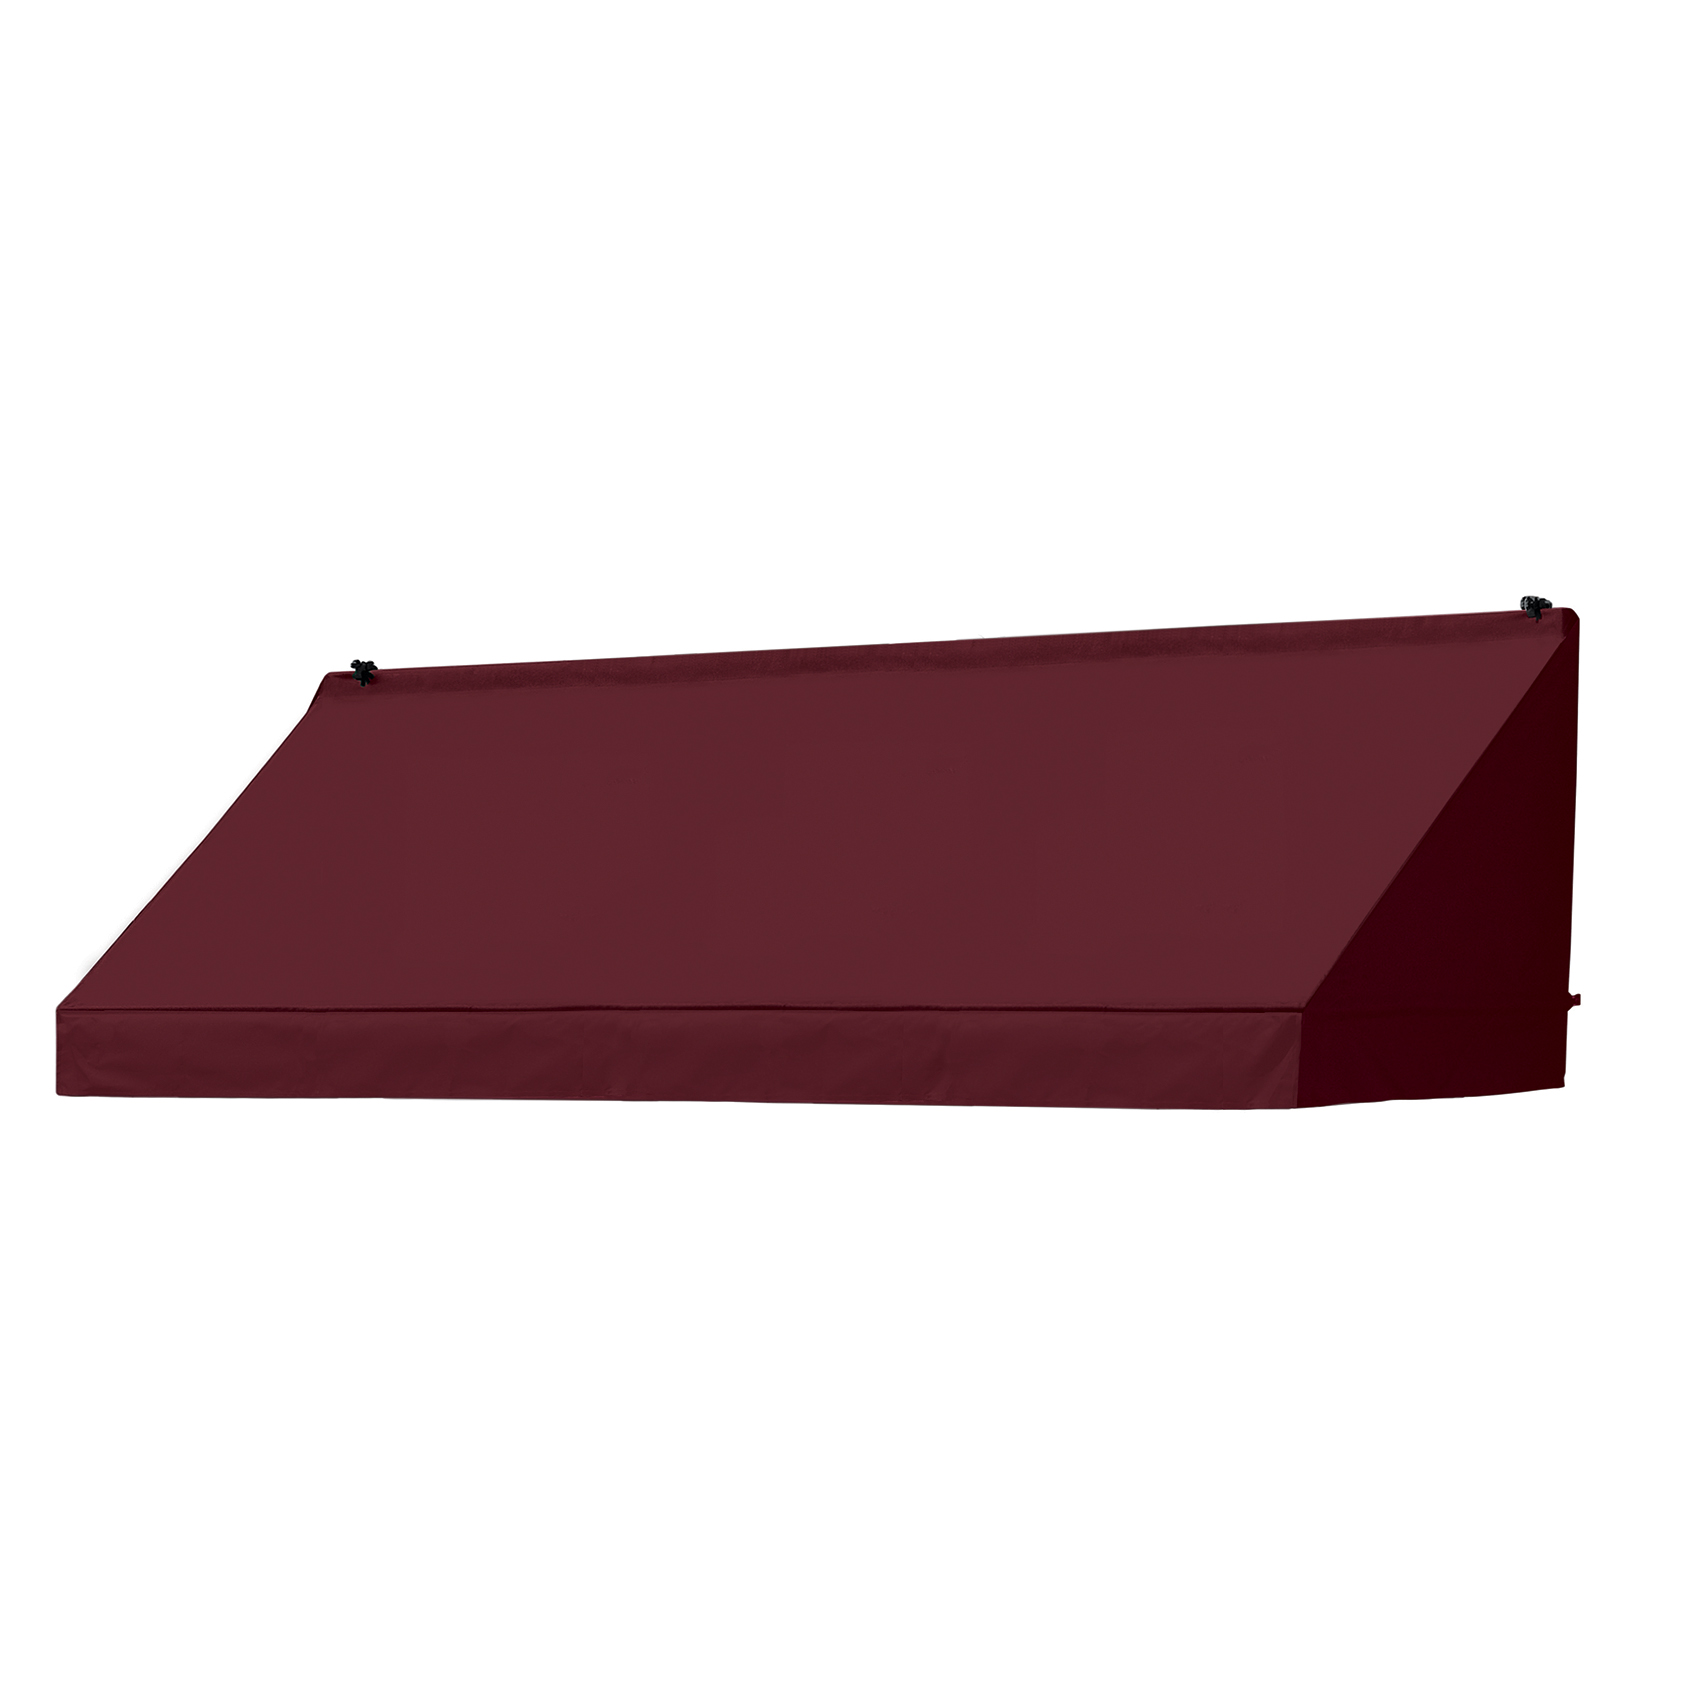 UPC 799870462765 product image for Awnings in a Box® 6' Classic Style Awning in Assorted Colors | upcitemdb.com